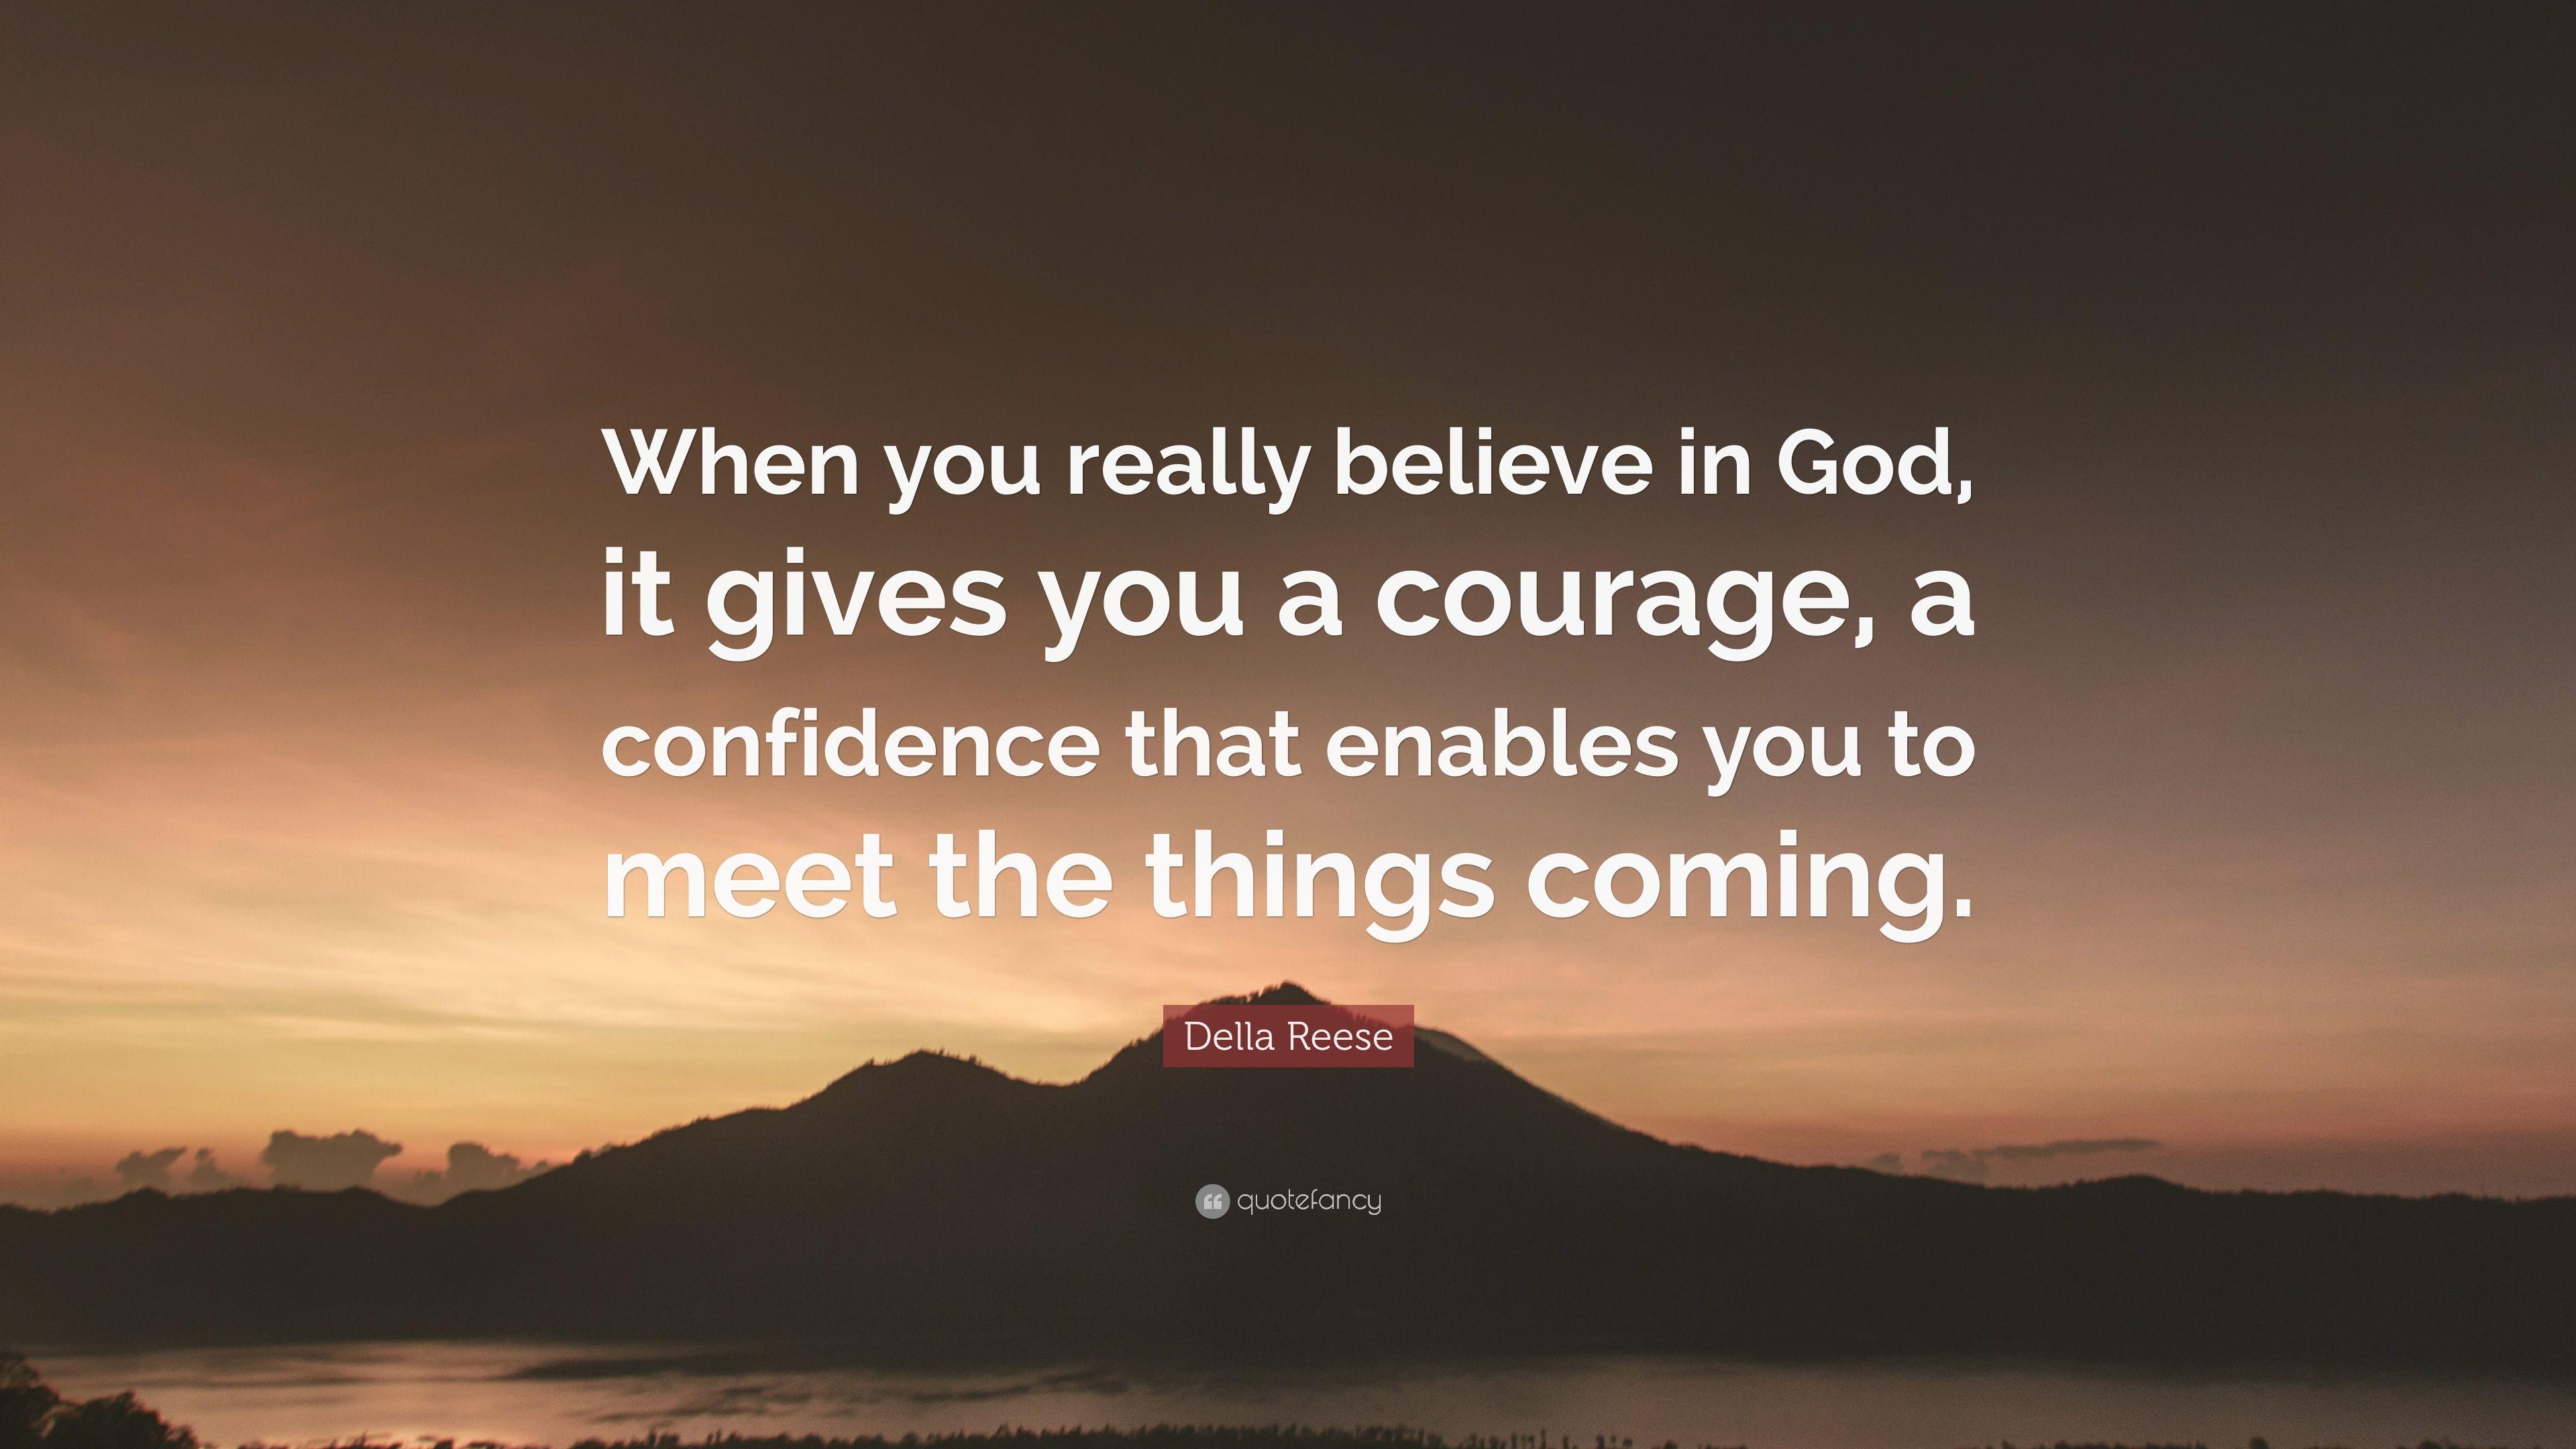 Della Reese Quote: “When you really believe in God, it gives you a